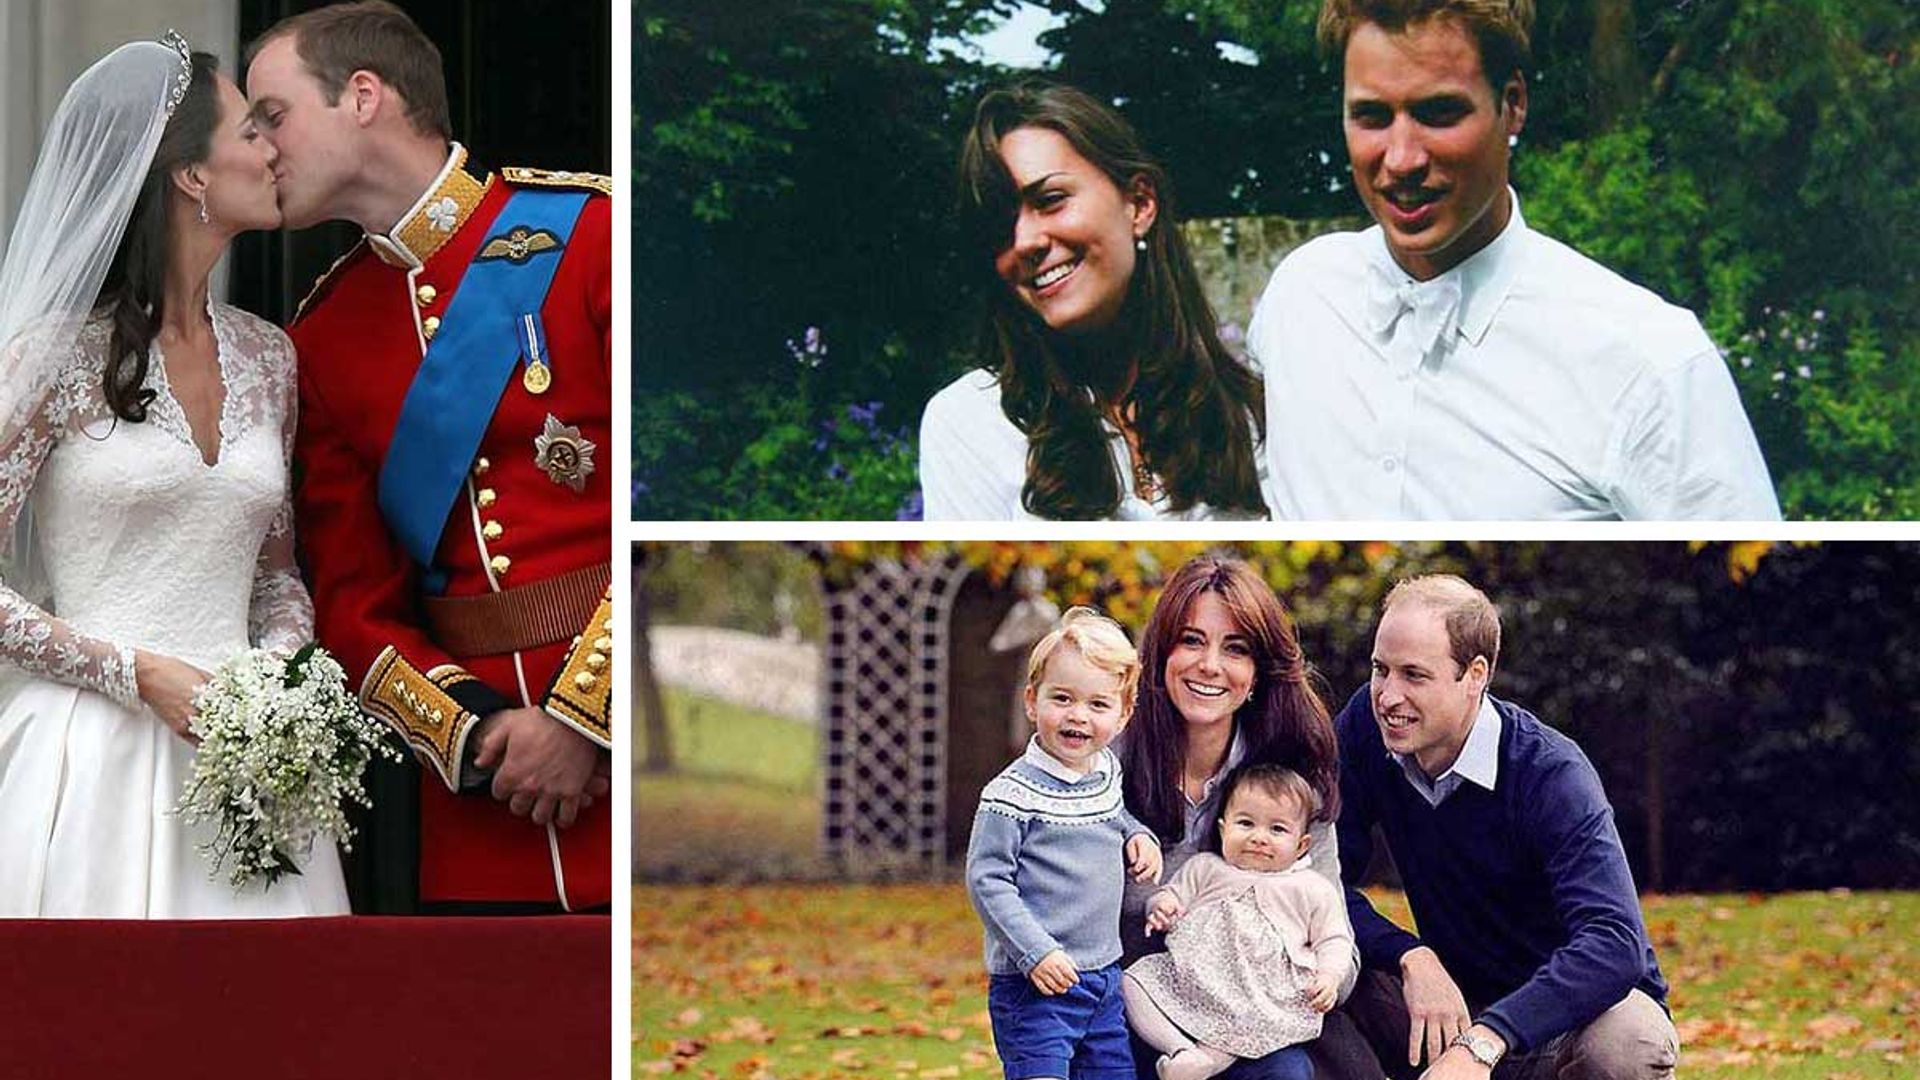 13 adorable quotes Prince William & Kate Middleton said about each other